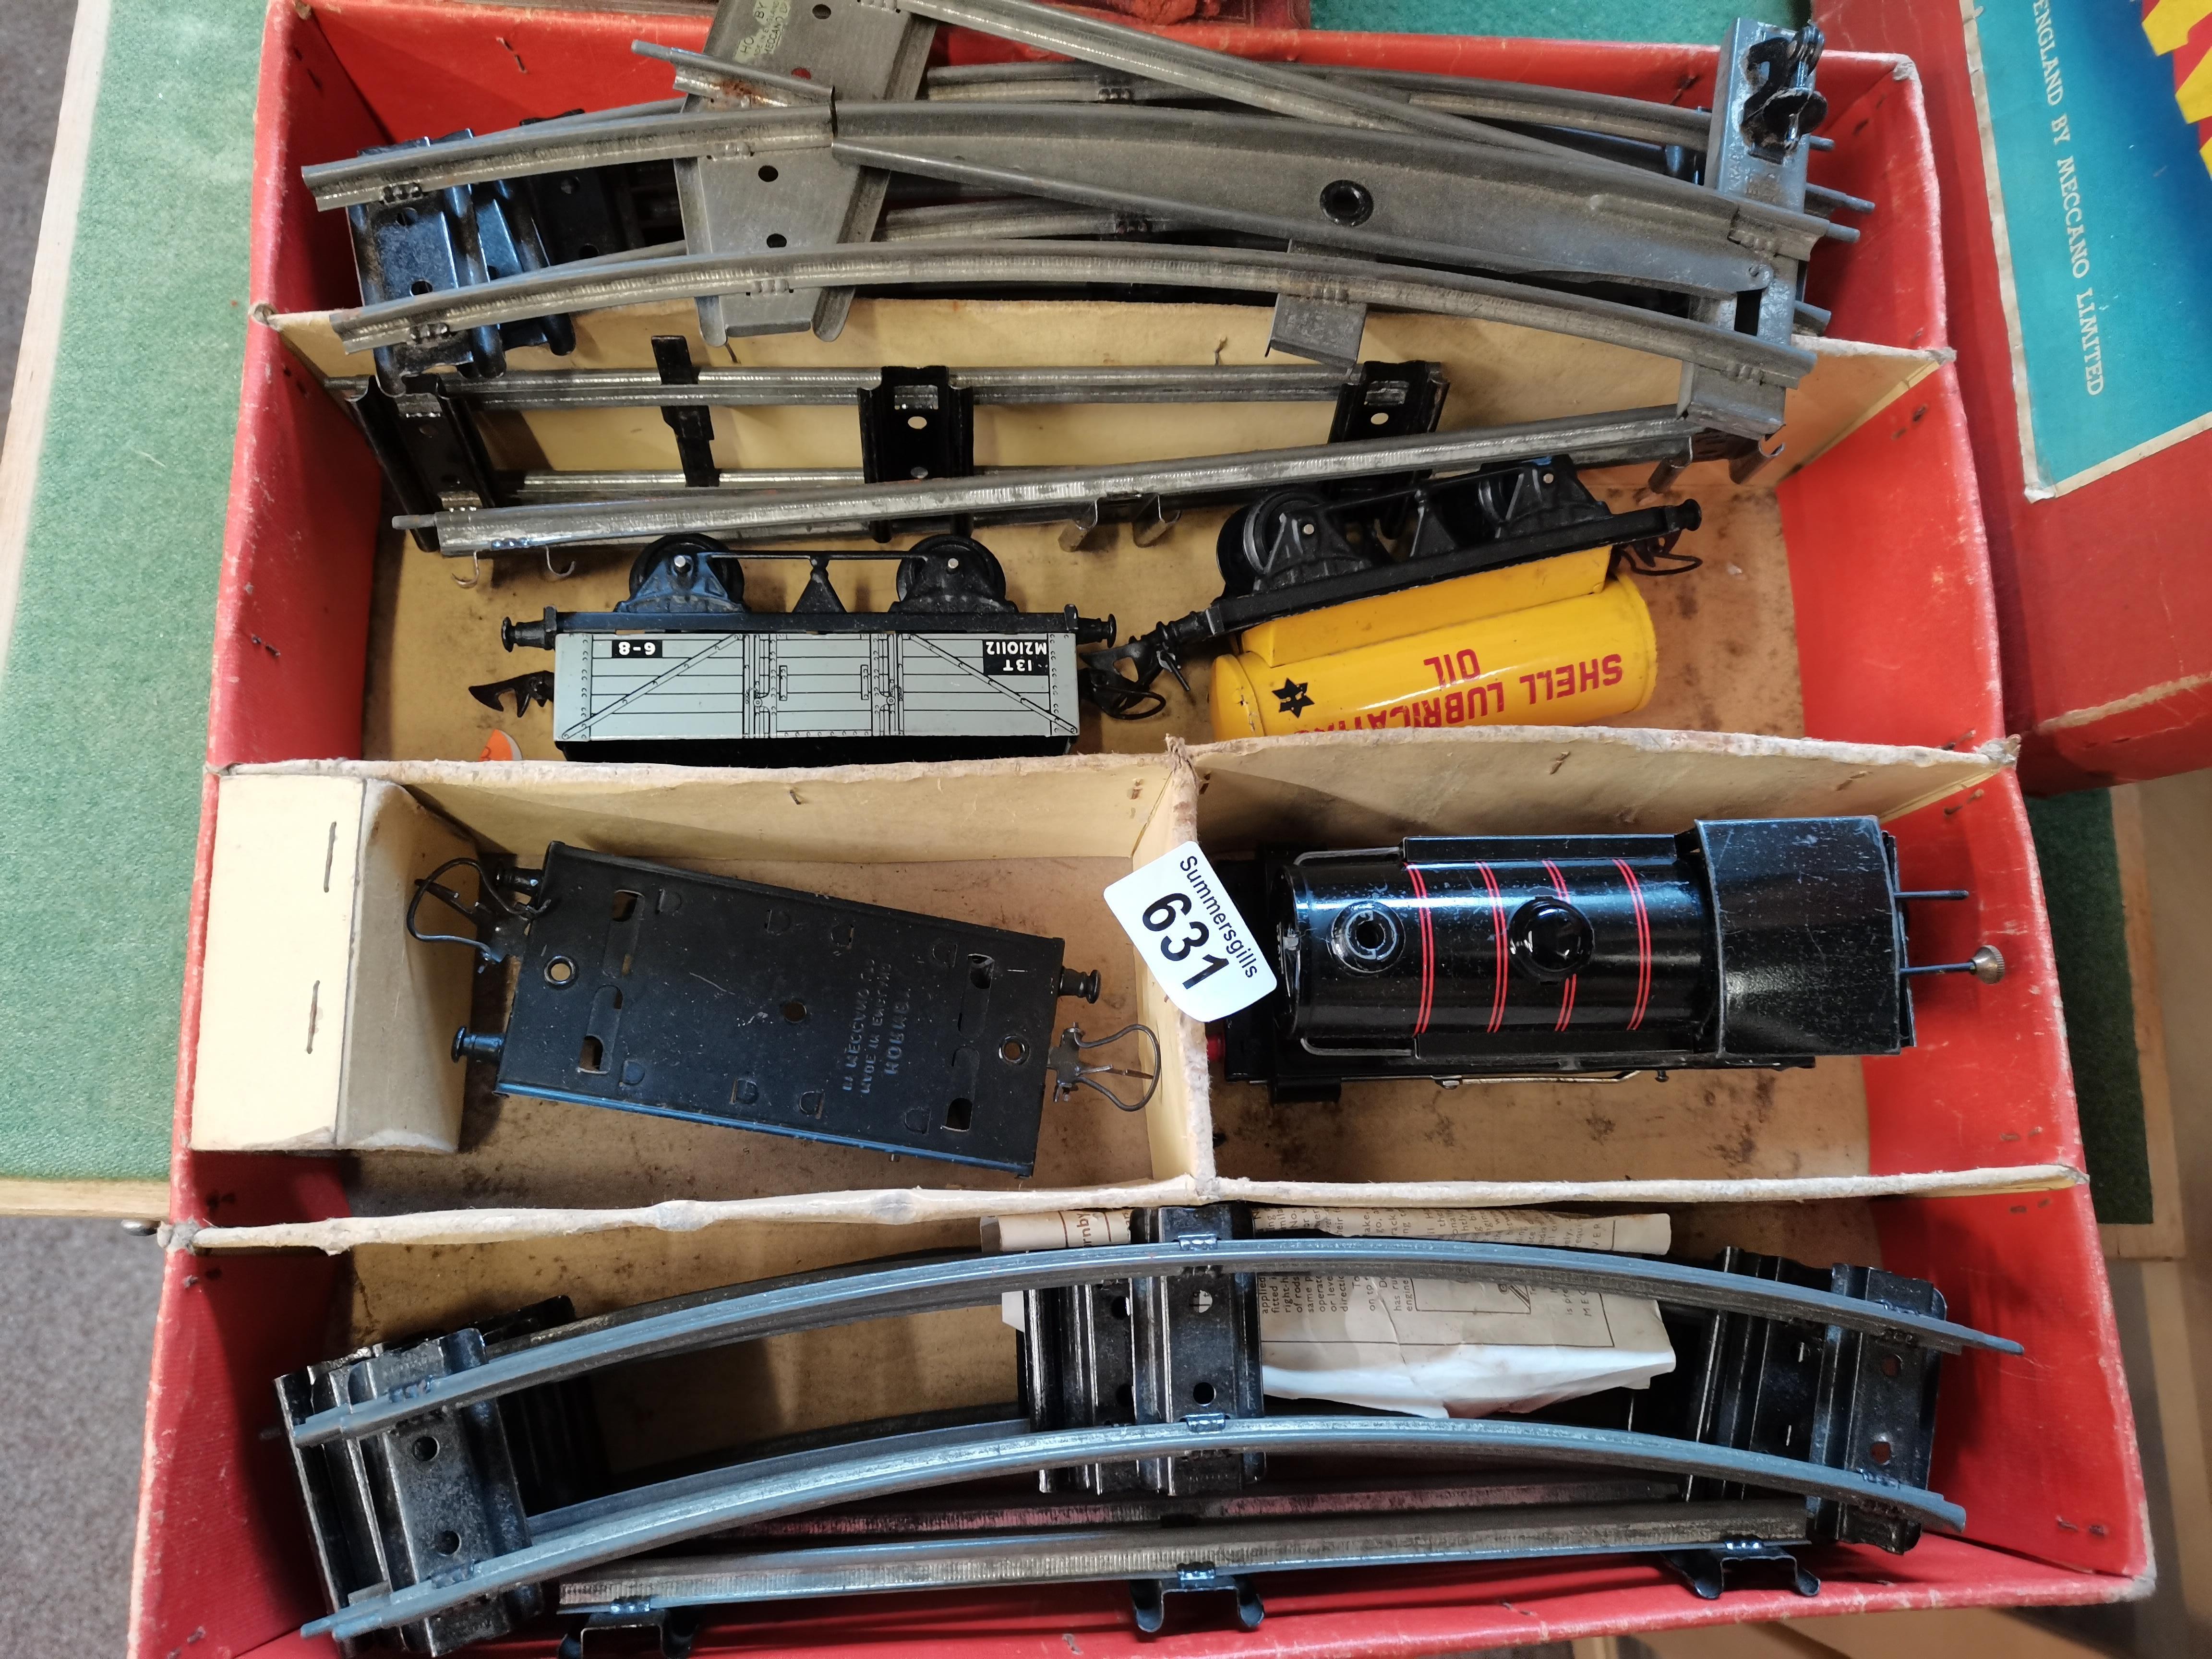 Hornby train set in box good condition marked number on train 82011 - Image 3 of 3